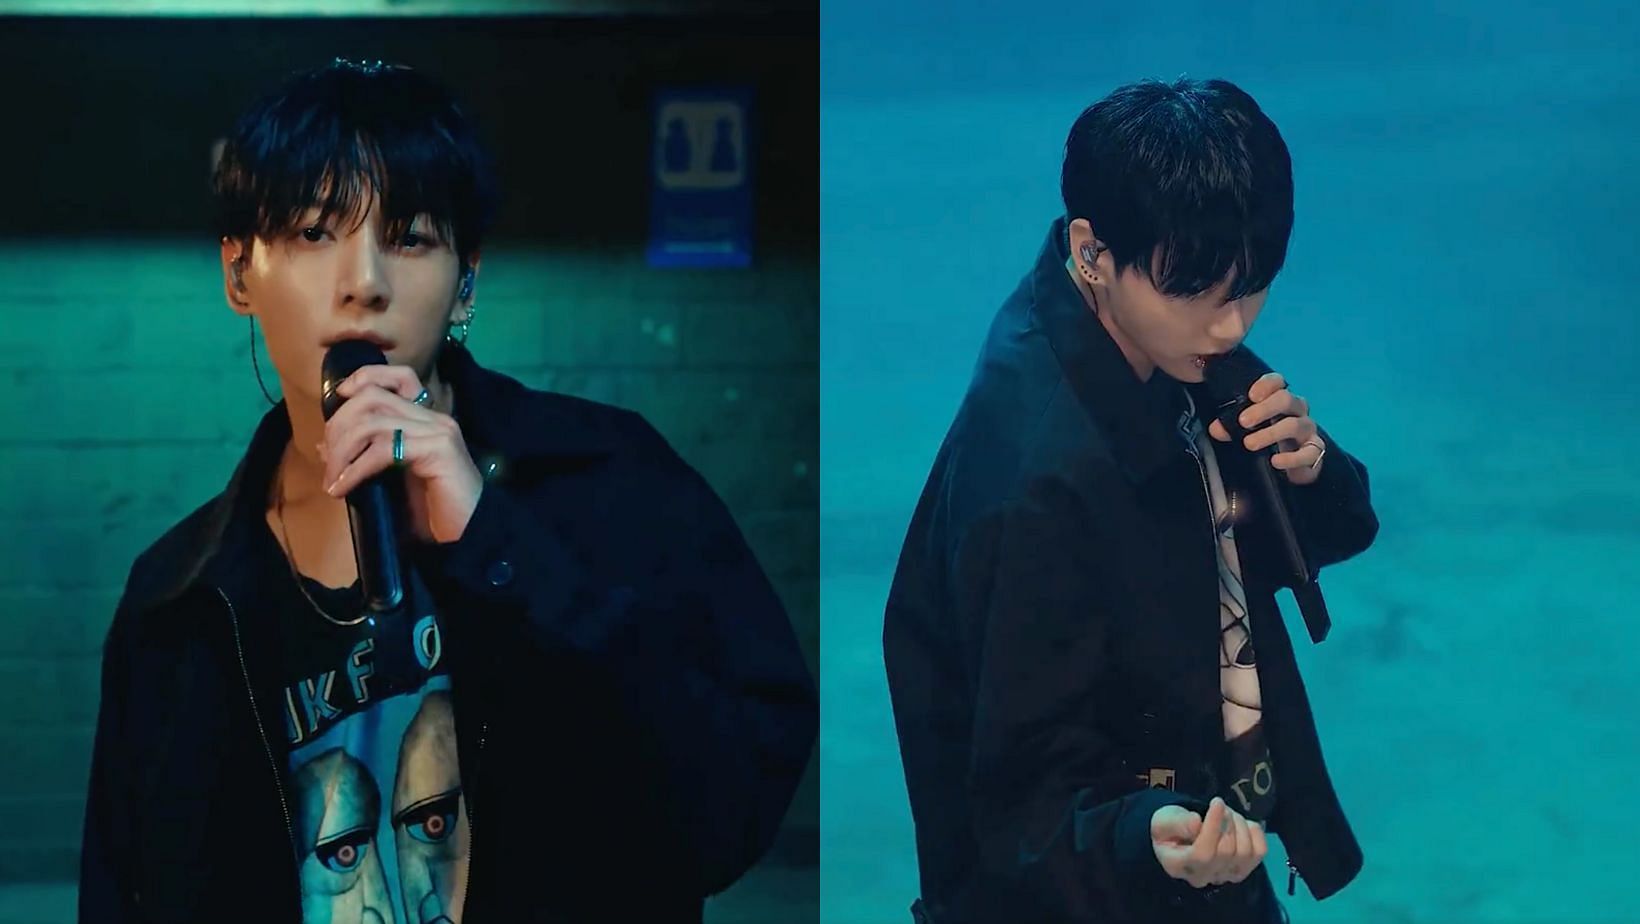 Featuring Jungkook from Audacy LIVE. (Images via X/@jjklve)